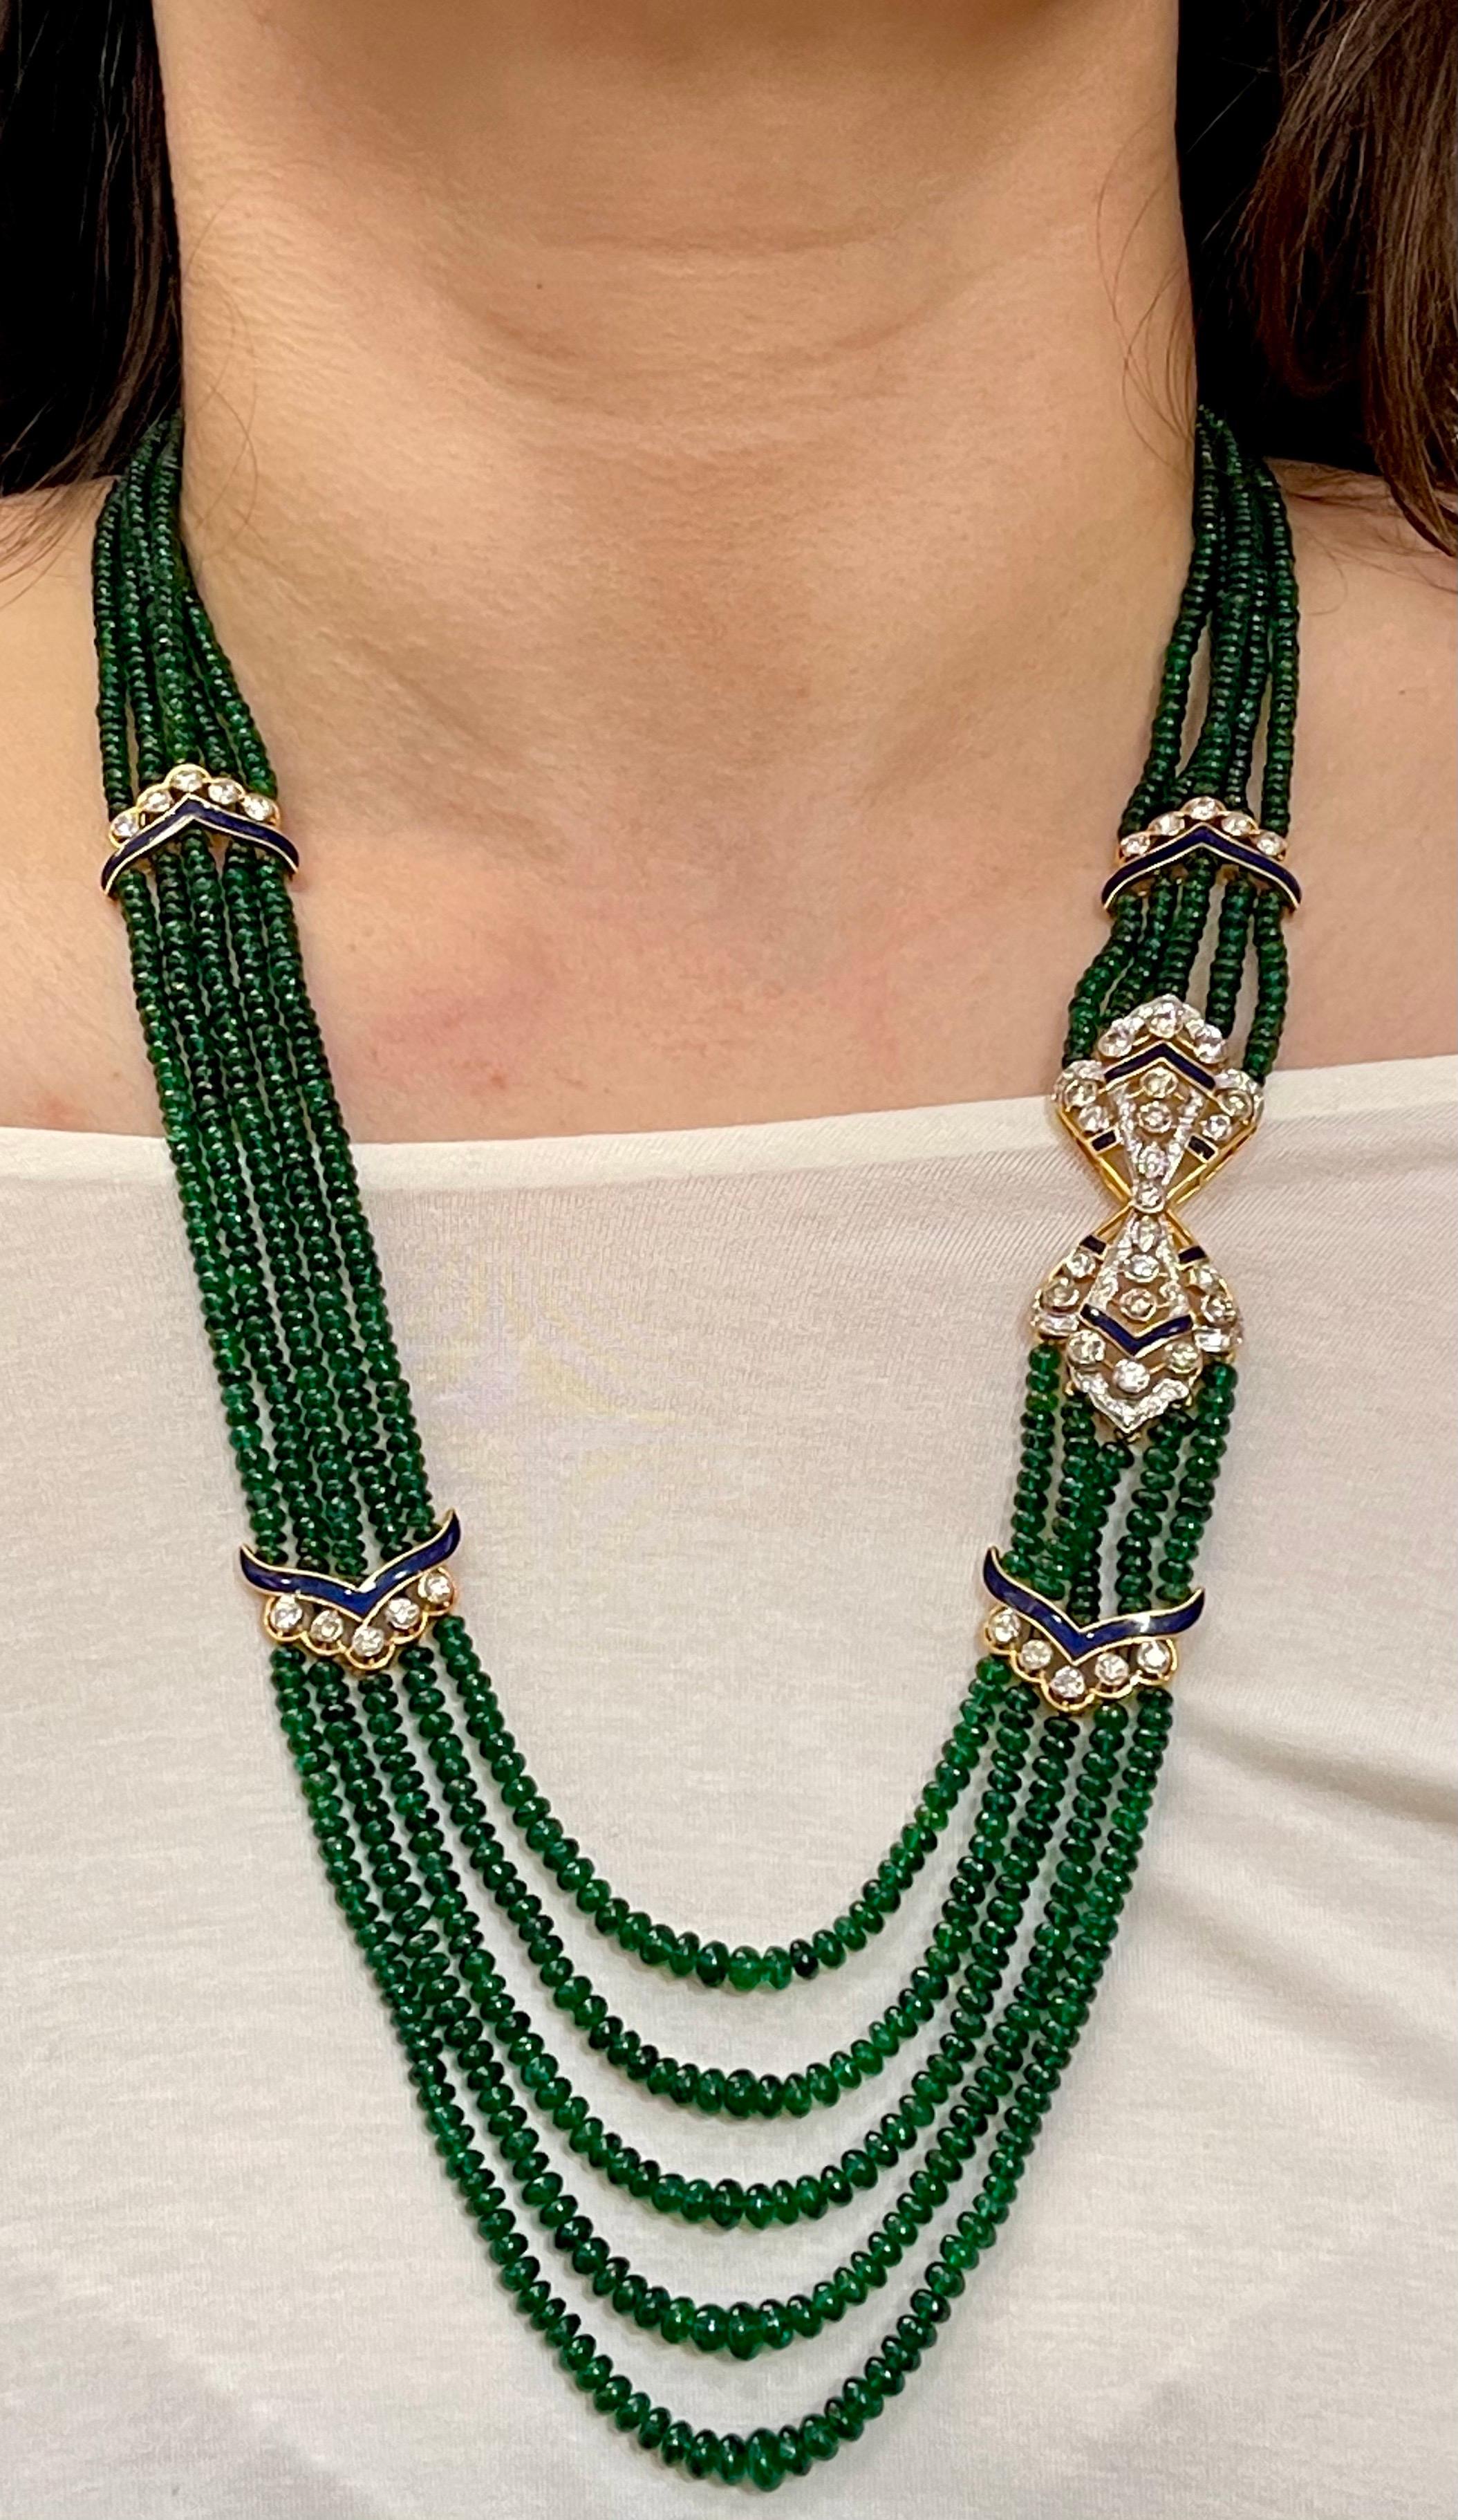 300 Carat 5-Strand Emerald Necklace with 4.8 Carat Diamond & Enamel in 14k Gold For Sale 7